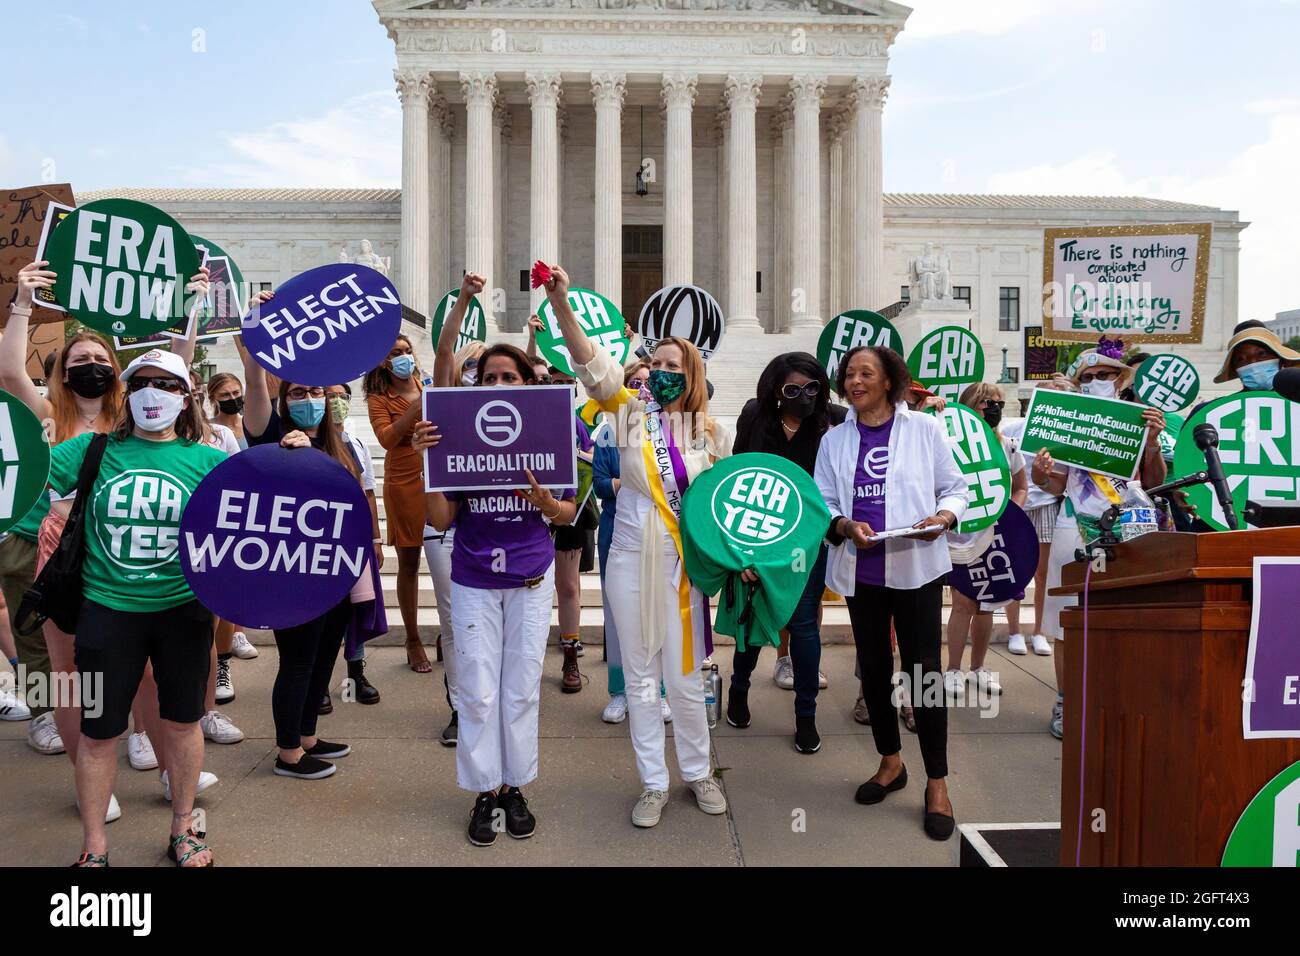 Washington, DC, USA, 26 August, 2021.  Pictured: Demonstrators at a rally to pass the Equal Rights Amendment (ERA) at the Supreme Court cheer following the conclusion of the event.  The amendment would prohibit discrimination on the basis of sex, which would require equal pay for women, among many other changes.  The required 38 states have ratified the amendment, but, unlike other constitutional amendments, a time limit was placed on the ERA, which has now expired.  ERA proponents are pressuring Congress to extend the time limit.  Credit: Allison Bailey / Alamy Live News Stock Photo